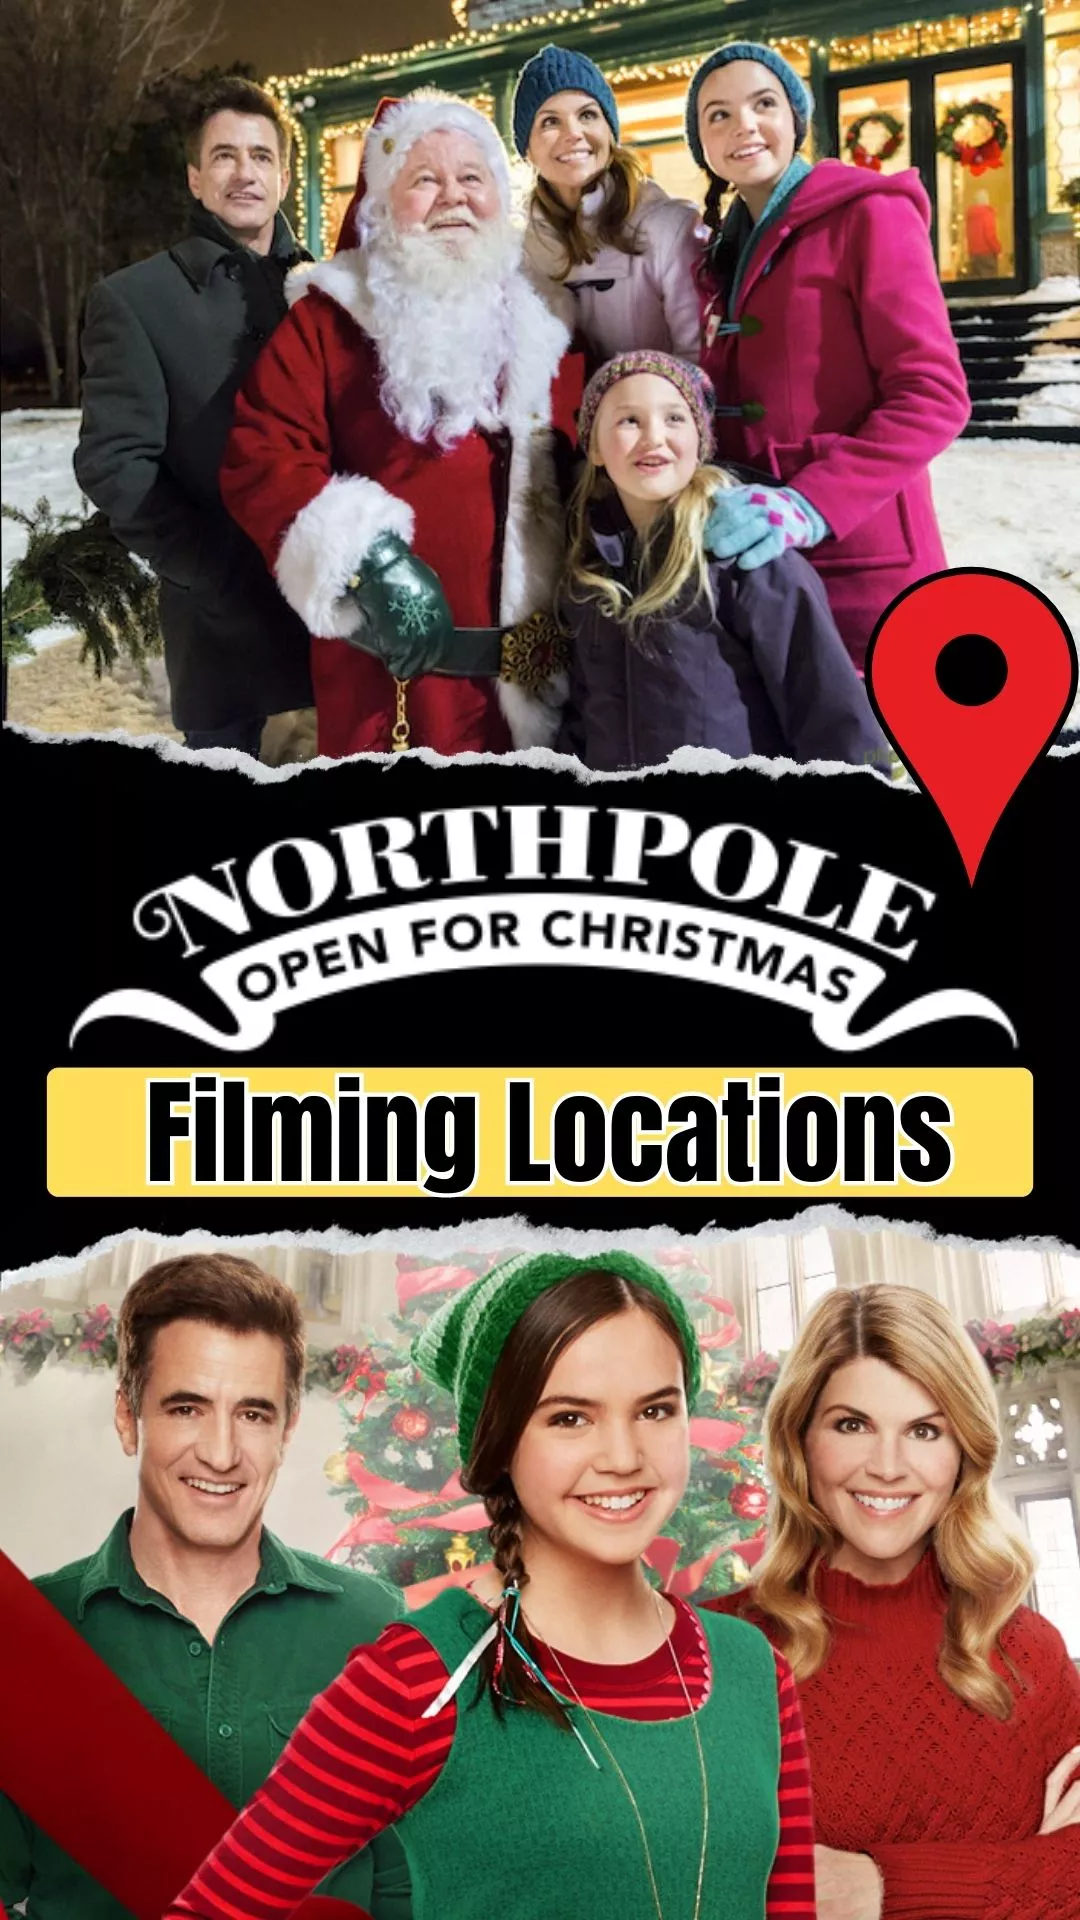 Northpole Open for Christmas Filming Locations